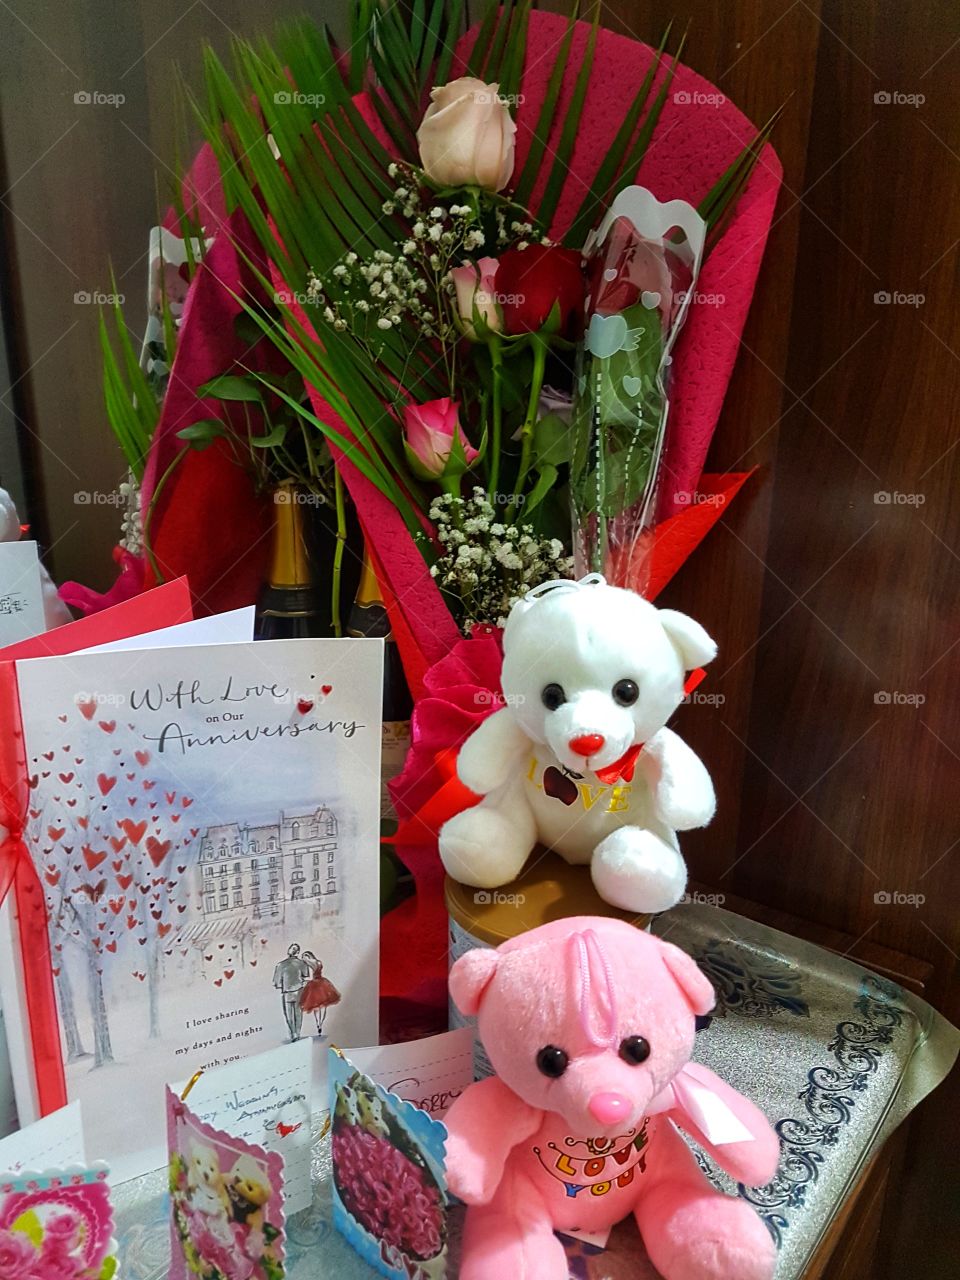 birthday / Wedding Anniversary Best Wishes with Teddy Bear and Wish Cards